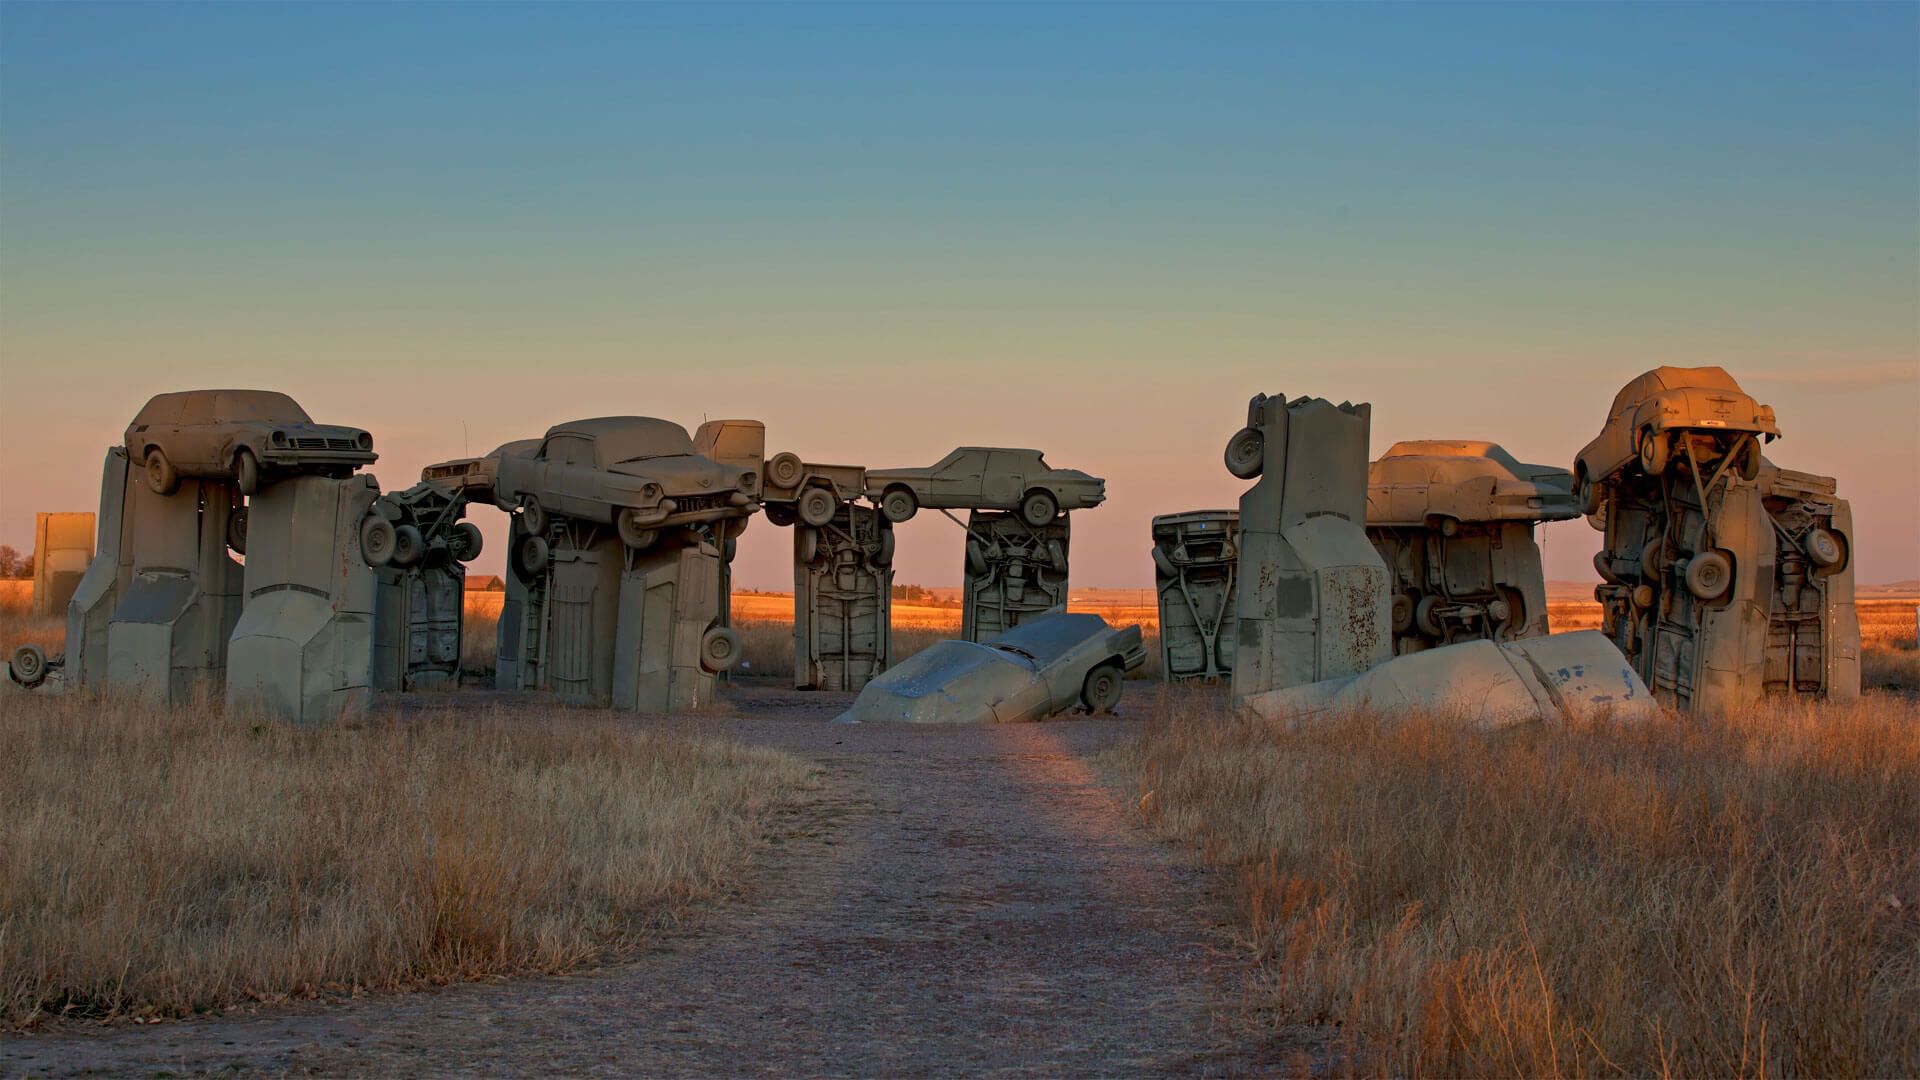 Kitsch collides with archaeology at Carhenge